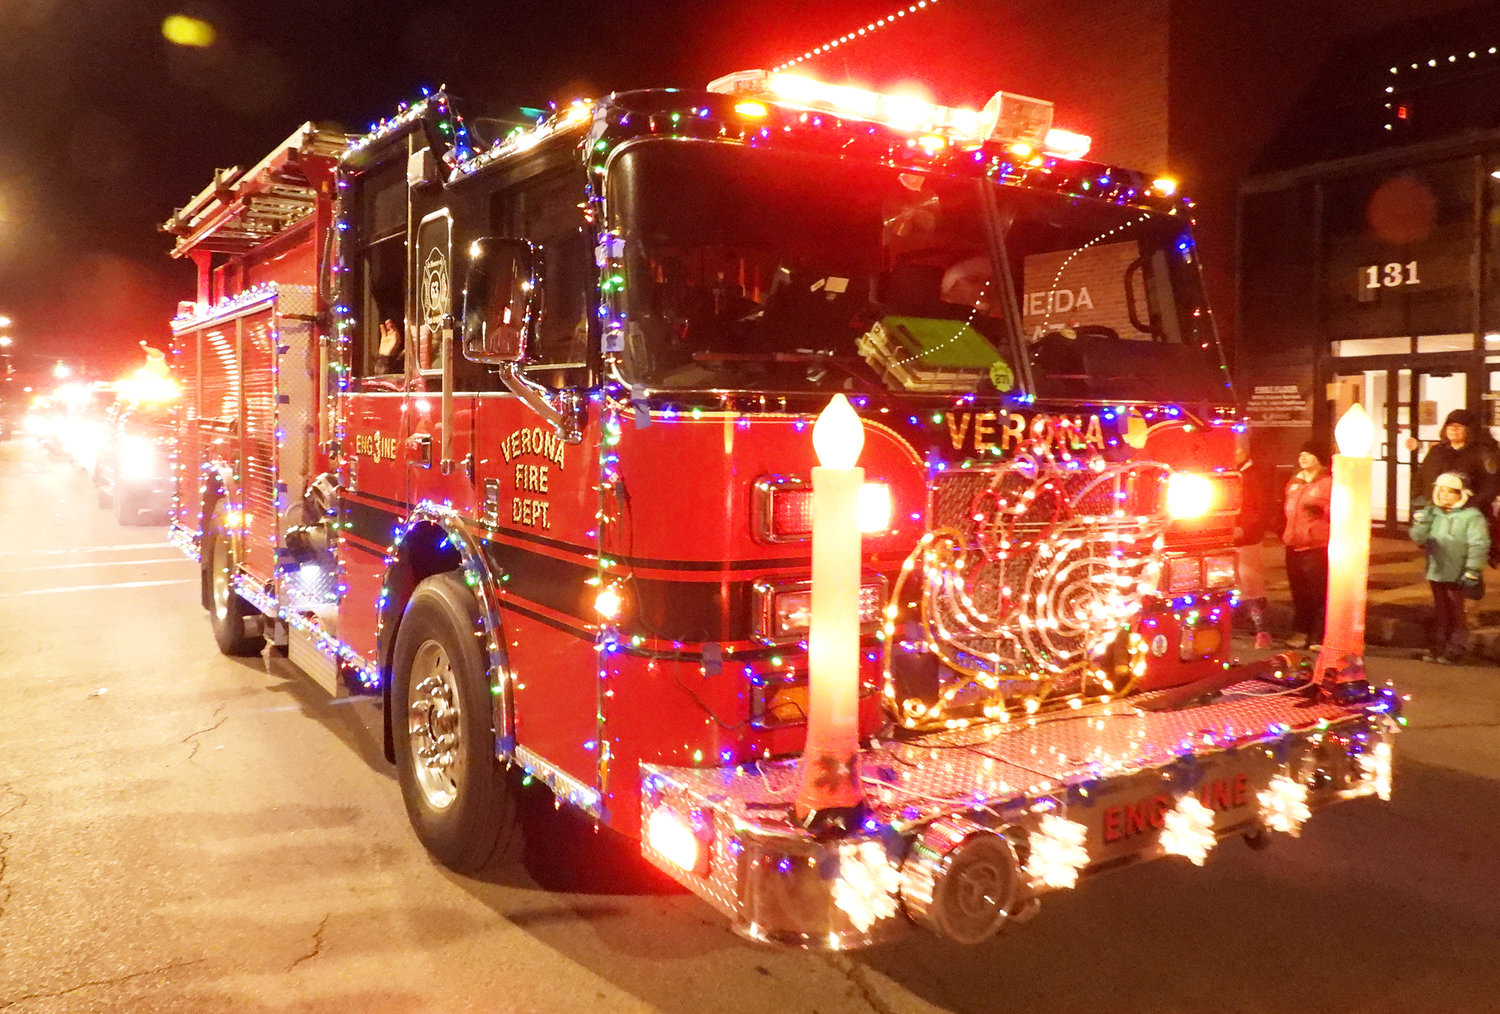 FESTIVE FIREFIGHTERS — The Verona Fire Department's Engine 3 is dressed to the nines for the holiday season and blares its siren for everyone on Main Street for the first-ever Oneida Parade of Lights. For more photos of the Oneida Christmas Festival, visit the Rome Sentinel website.